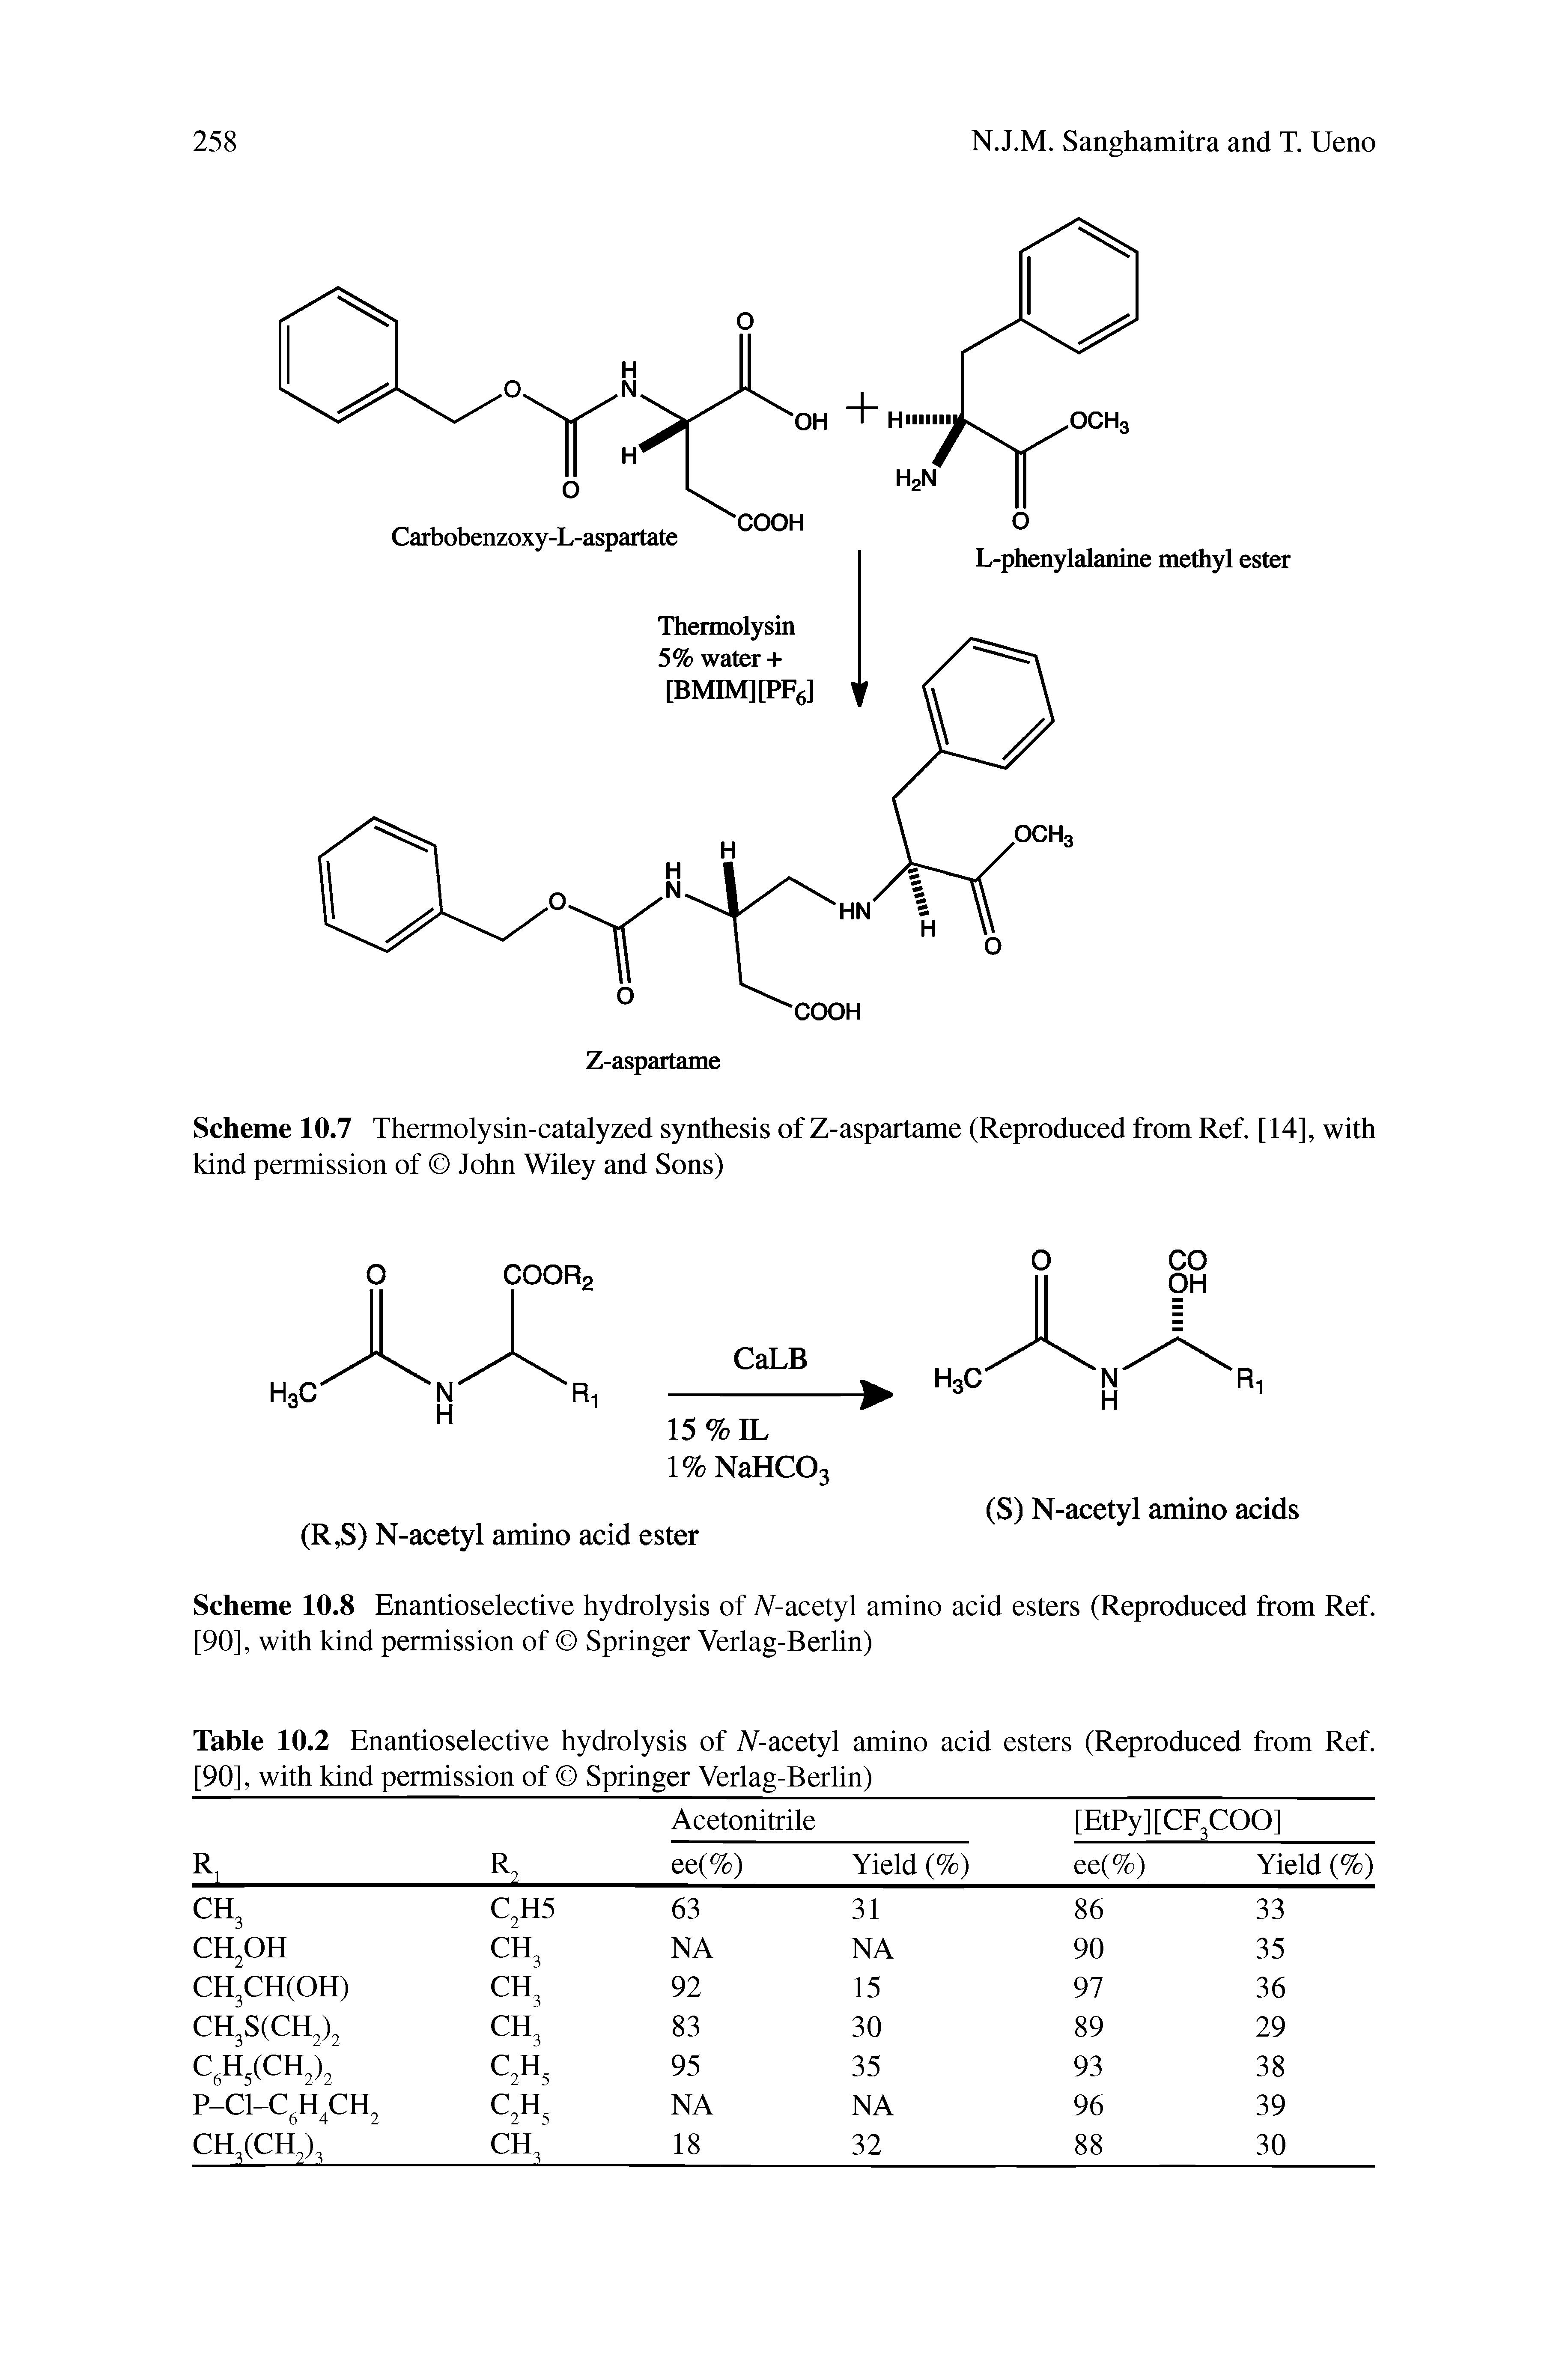 Scheme 10.7 Thermolysin-catalyzed synthesis of Z-aspartame (Reproduced from Ref. [ 14], with kind permission of John Wiley and Sons)...